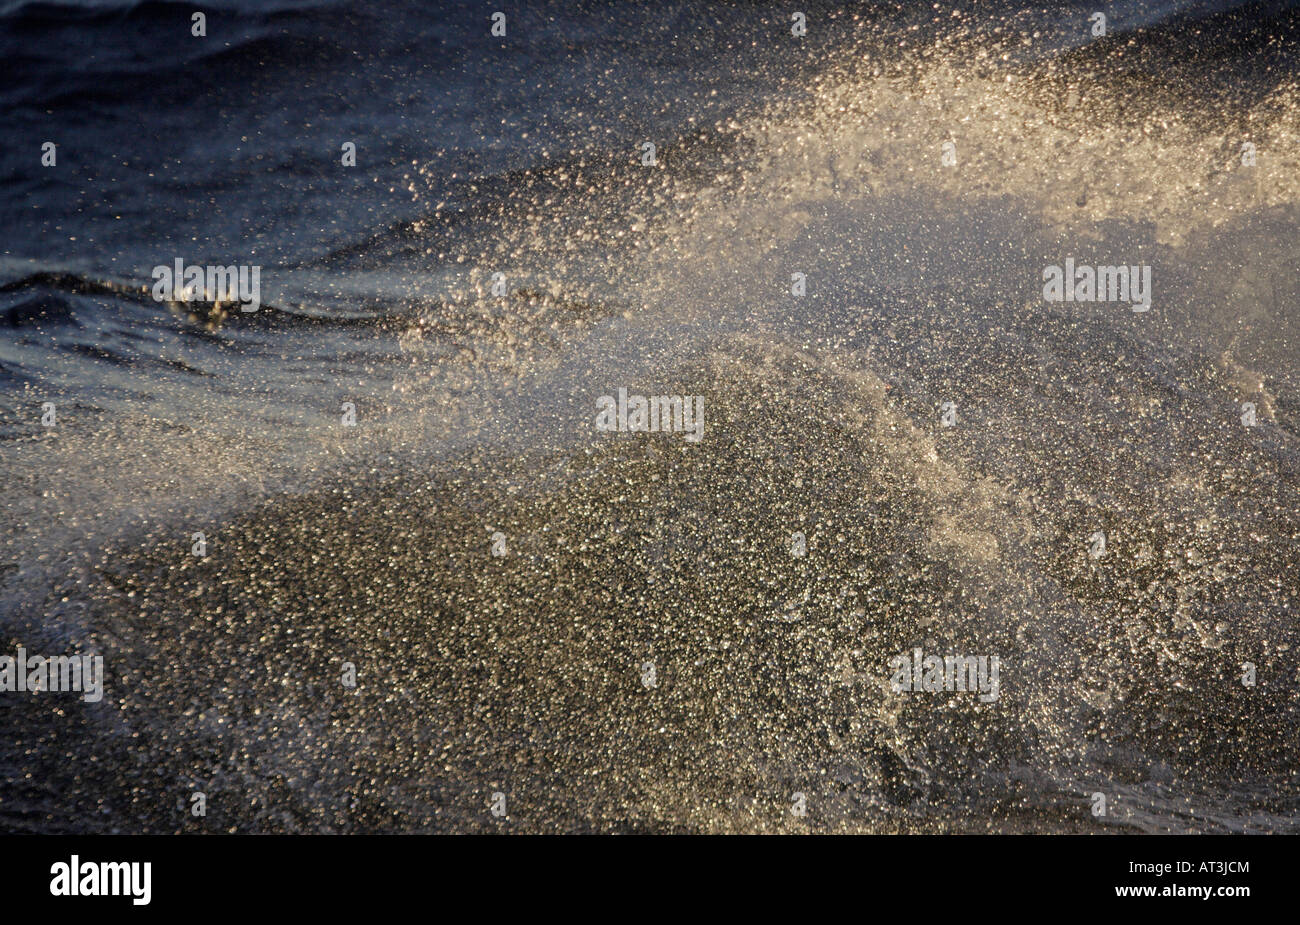 Waves in the South Atlantic sea Stock Photo